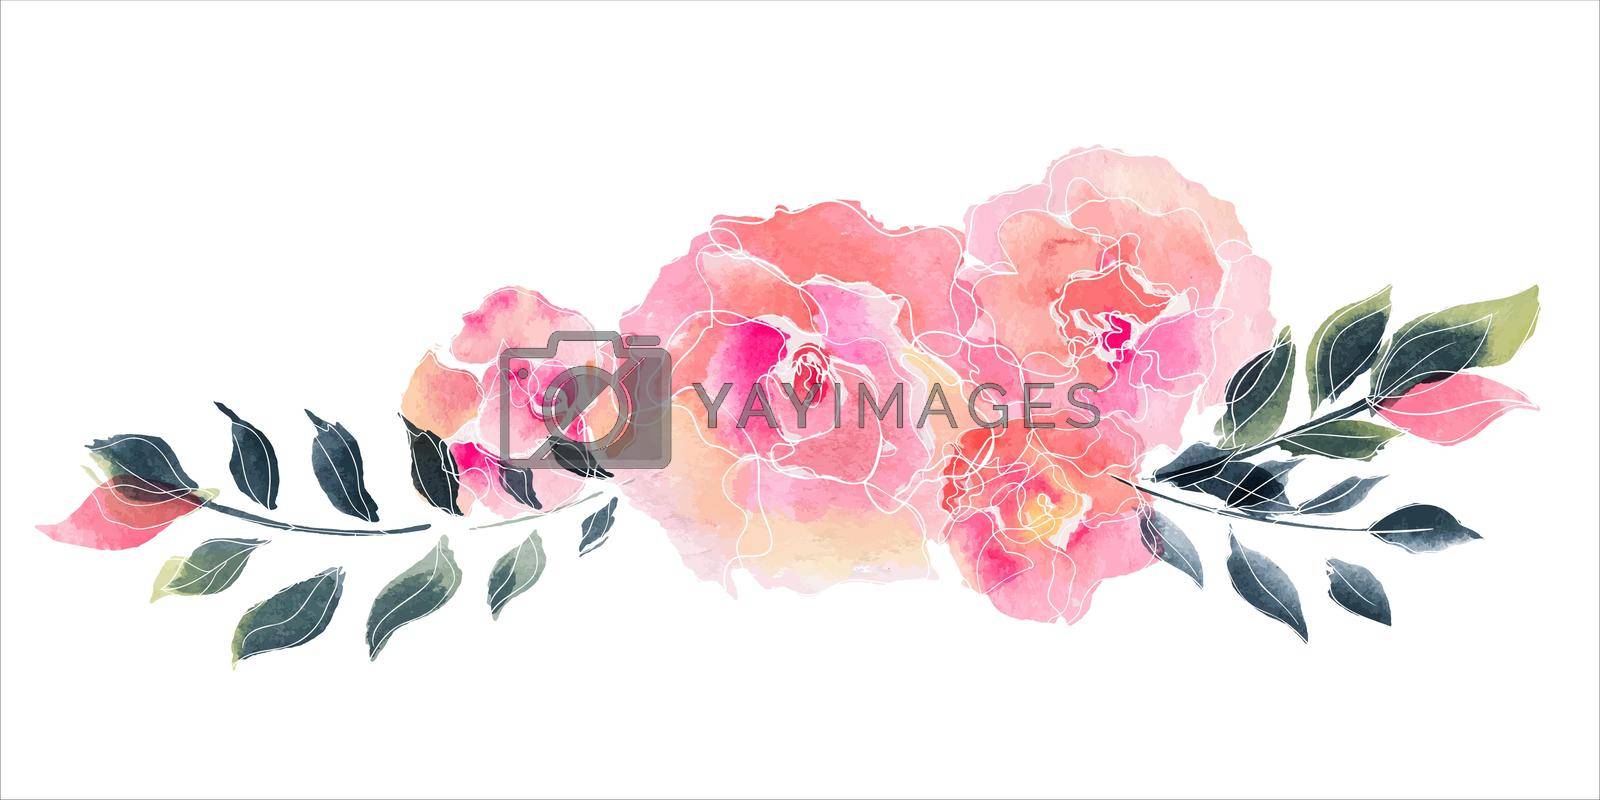 Royalty free image of Pink rose garland by Xeniasnowstorm